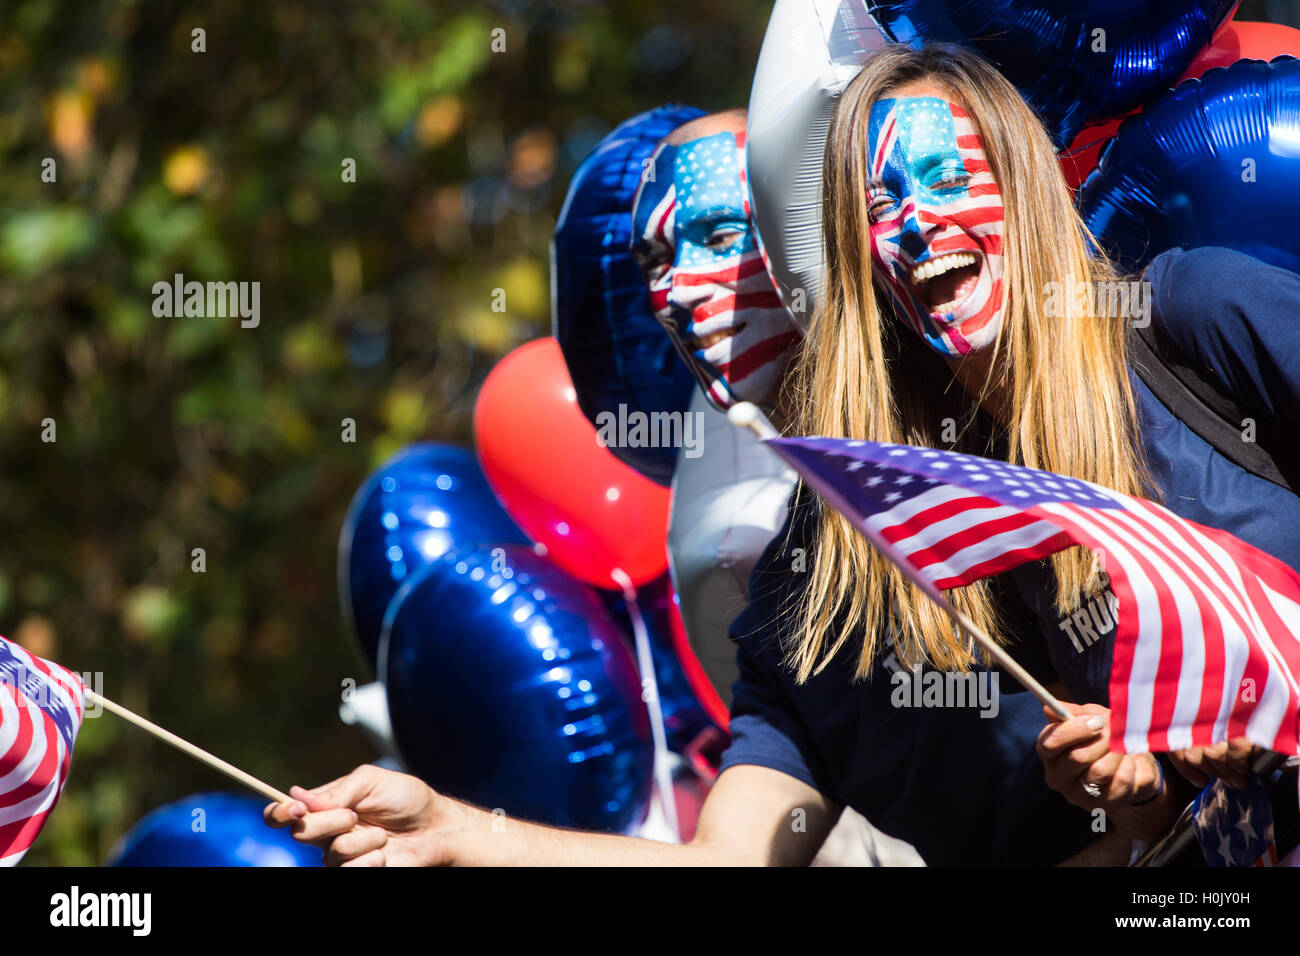 London, September 21st 2016. A 'Stop Trump' open topped red London double-decker bus tours central London in a bid to encourage US expats to vote for Clinton. XXXX. Credit:  Paul Davey/Alamy Live News Stock Photo